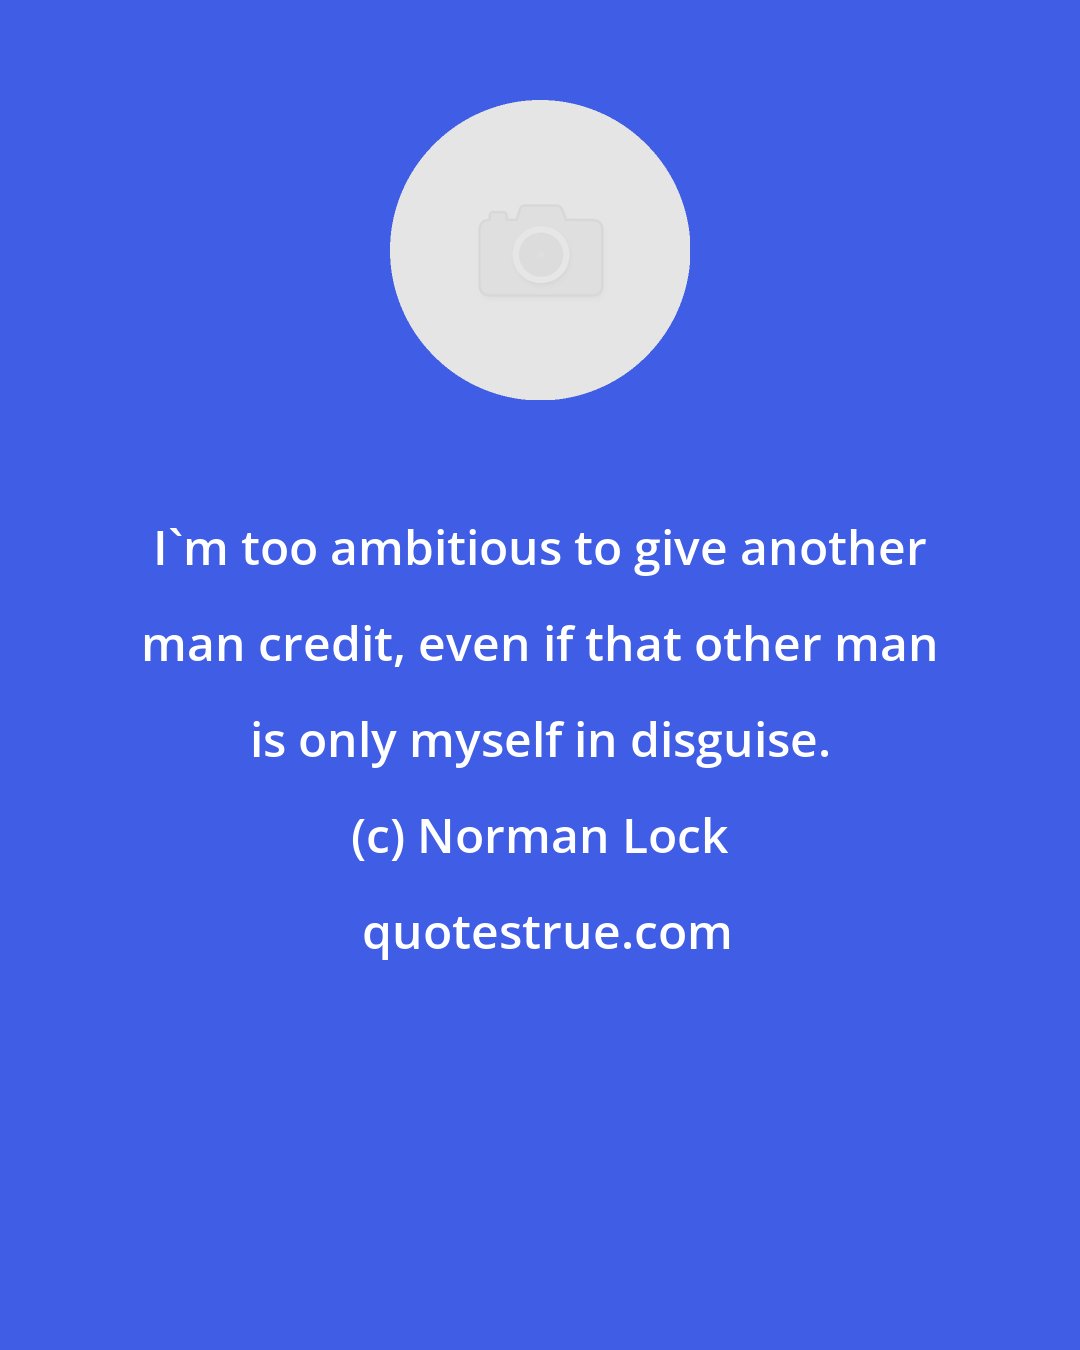 Norman Lock: I'm too ambitious to give another man credit, even if that other man is only myself in disguise.